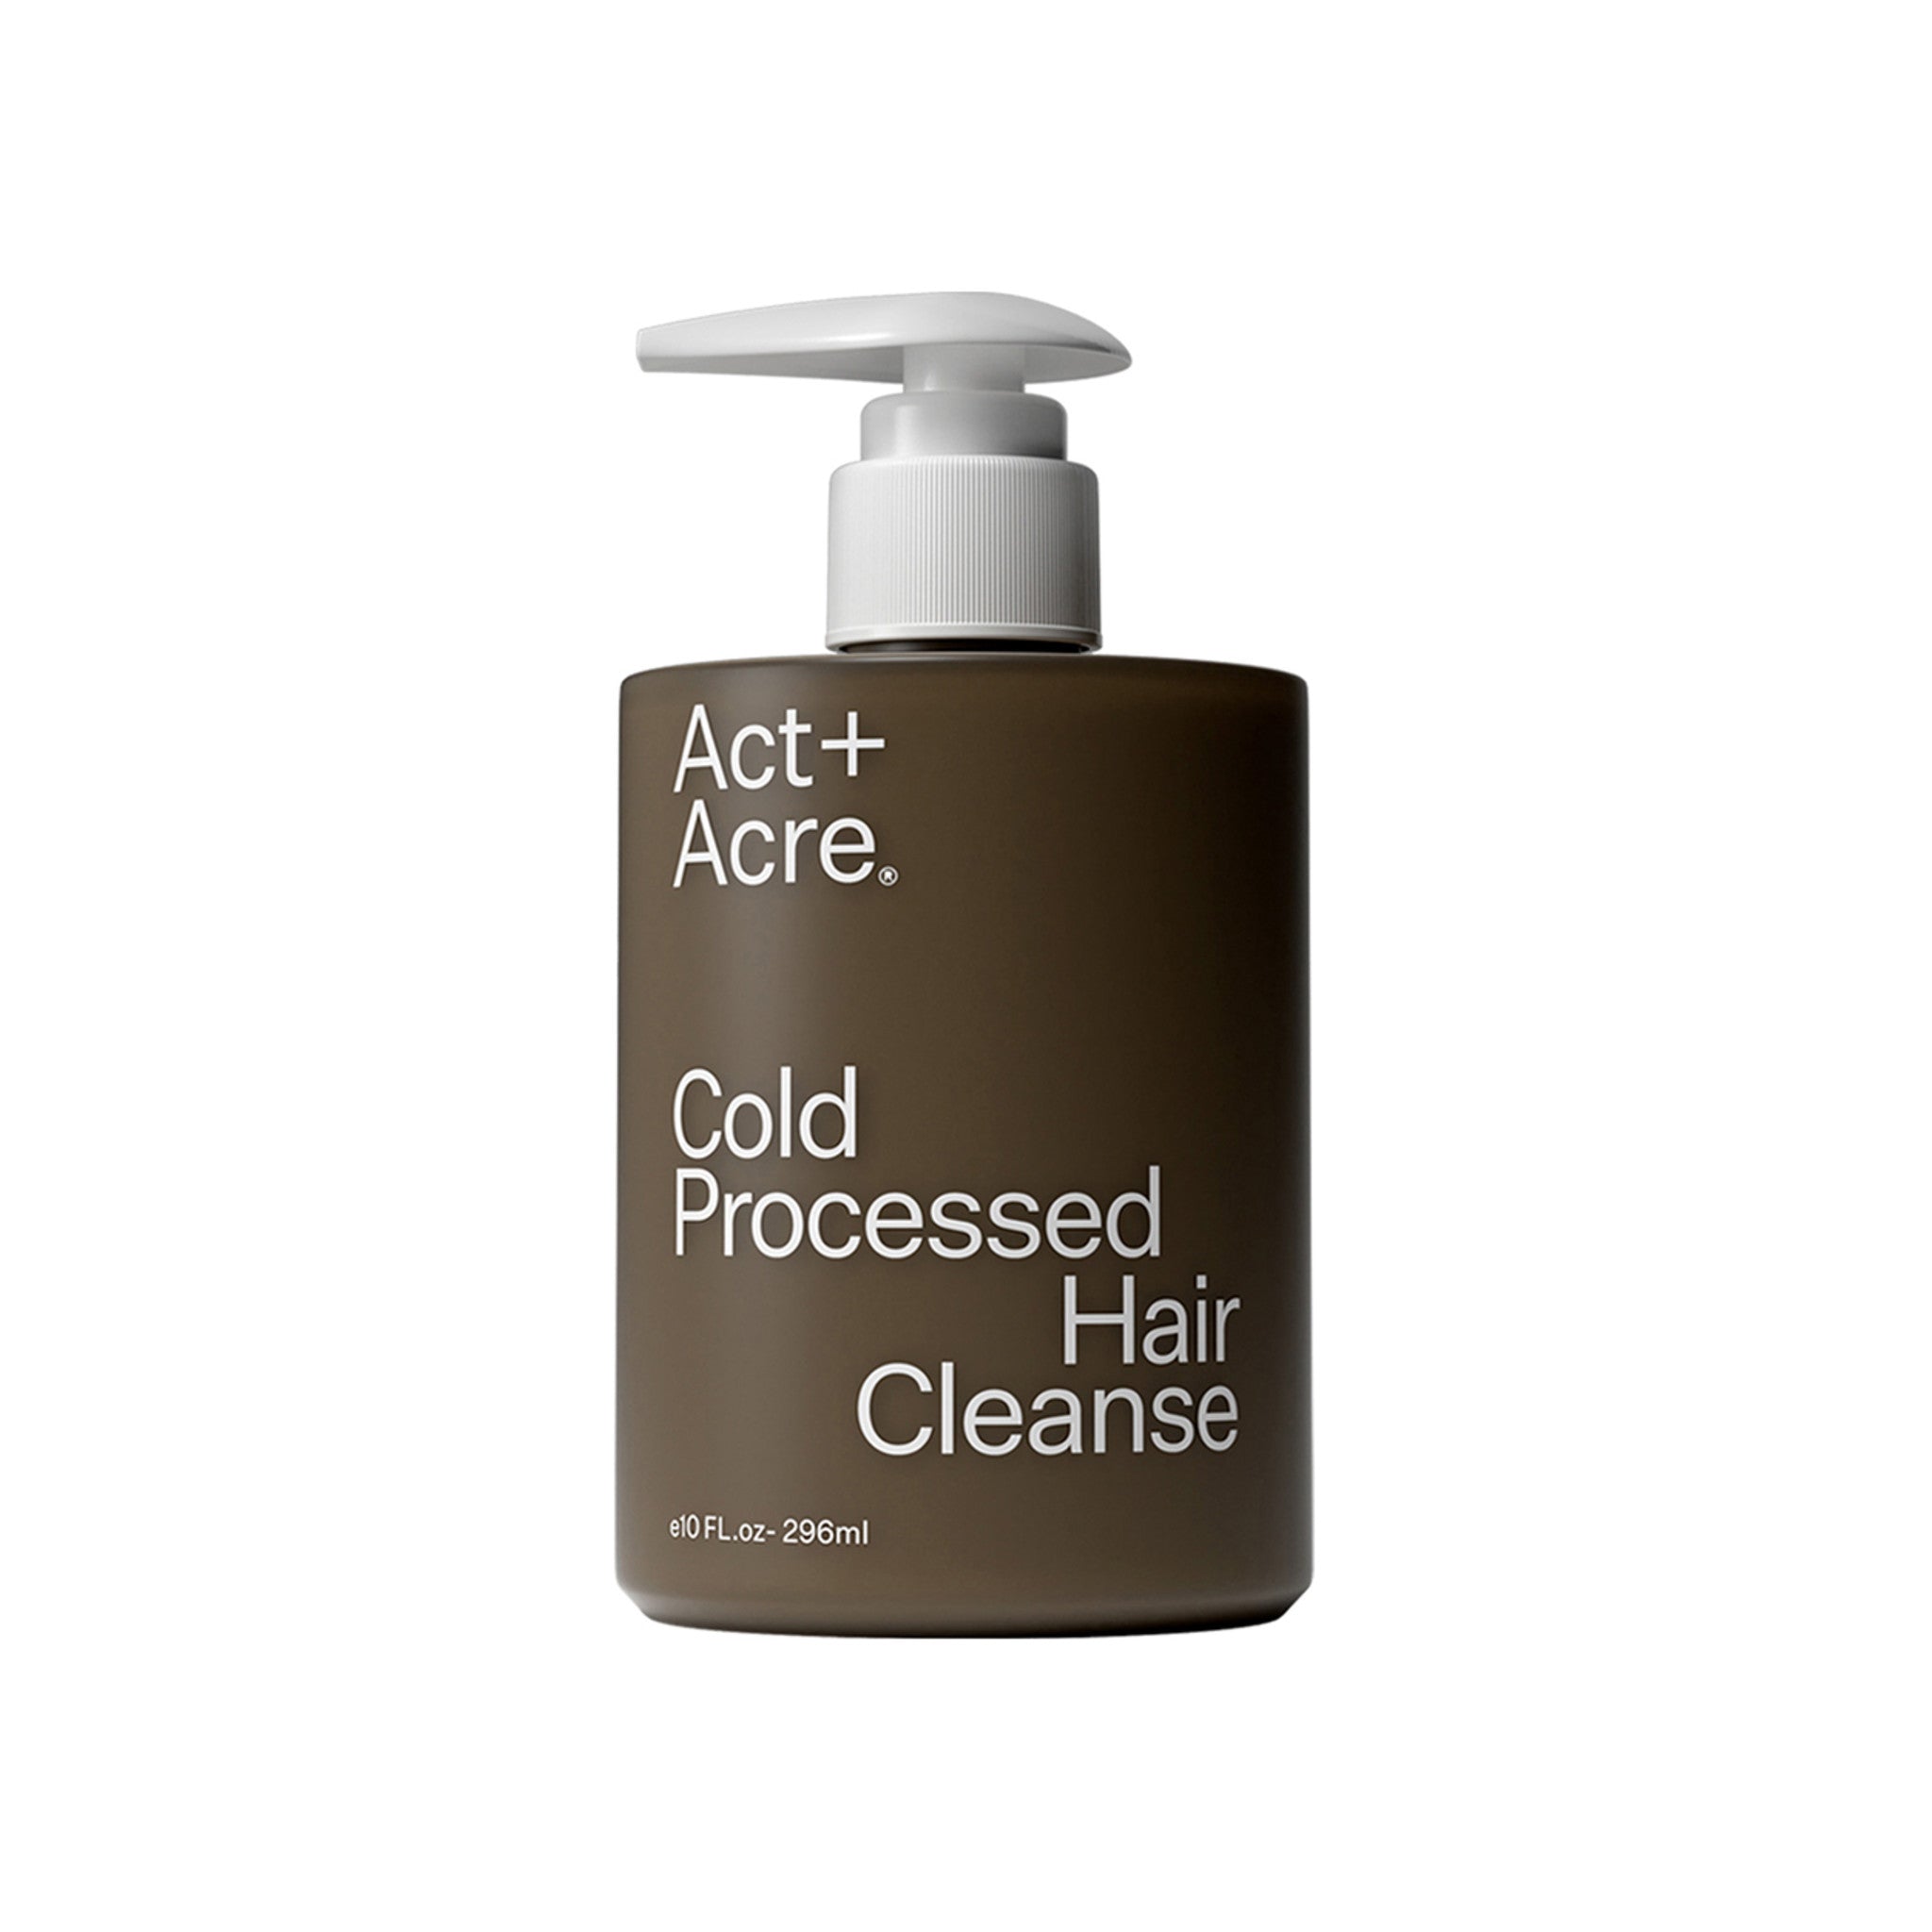 Act+Acre Cold Processed Cleanse Shampoo main image.